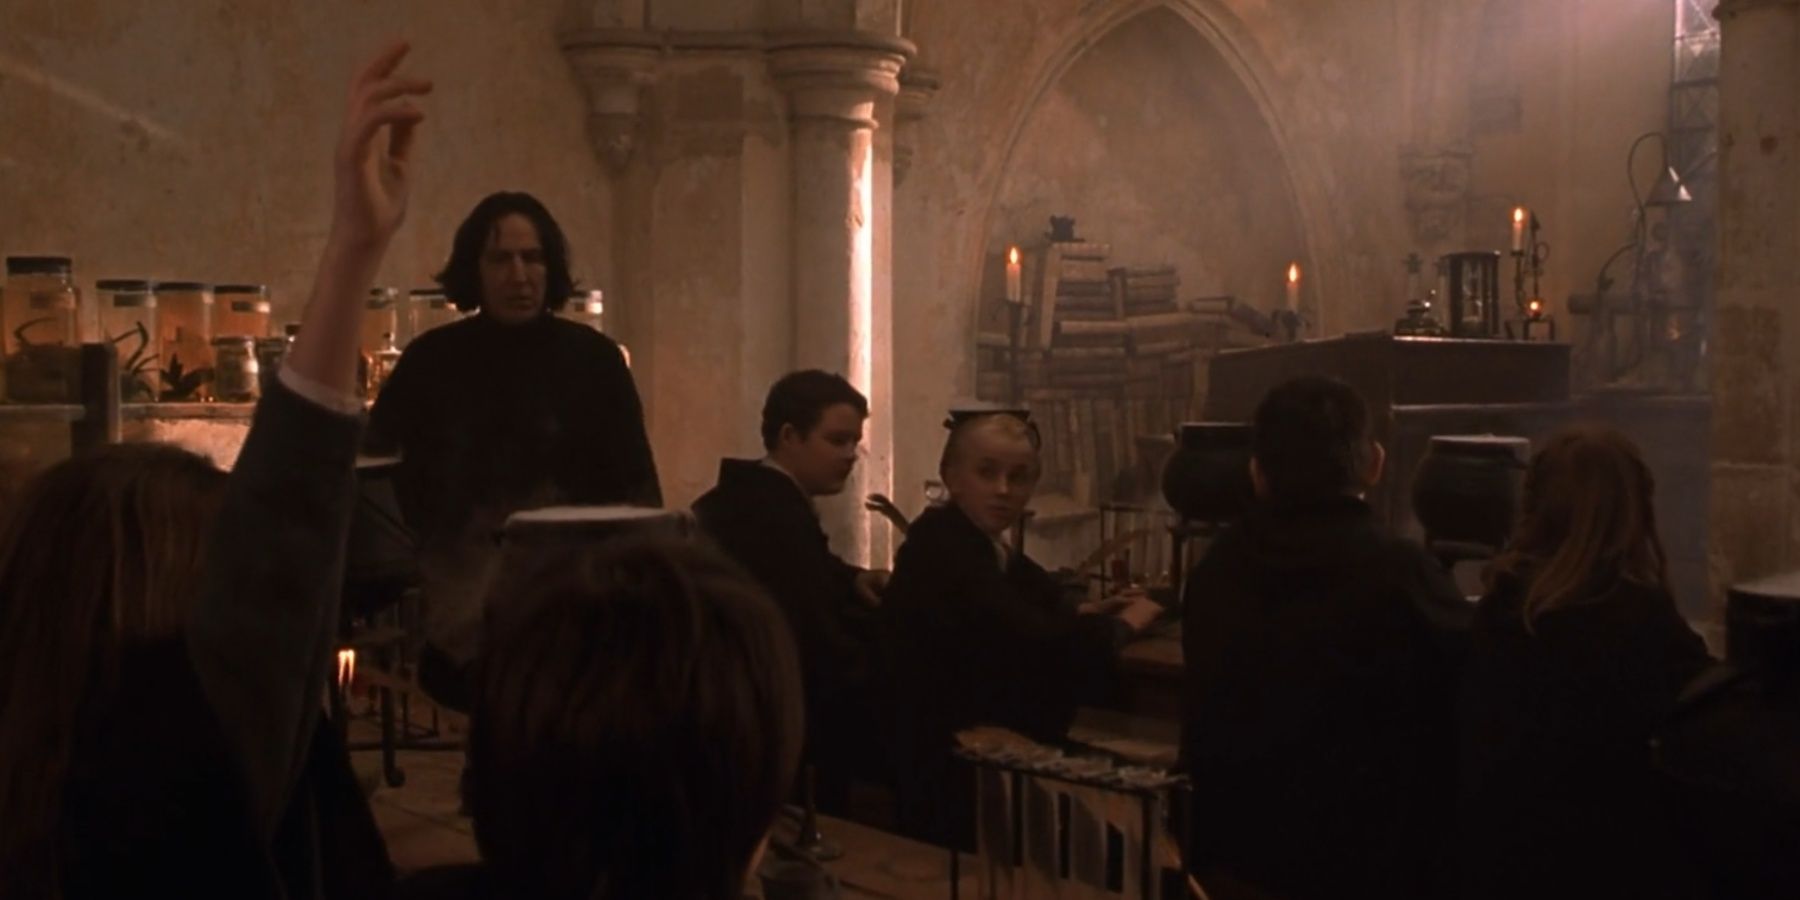 Hermione Granger raises her hand in Snape's class in Harry Potter and the Sorcerer's Stone.